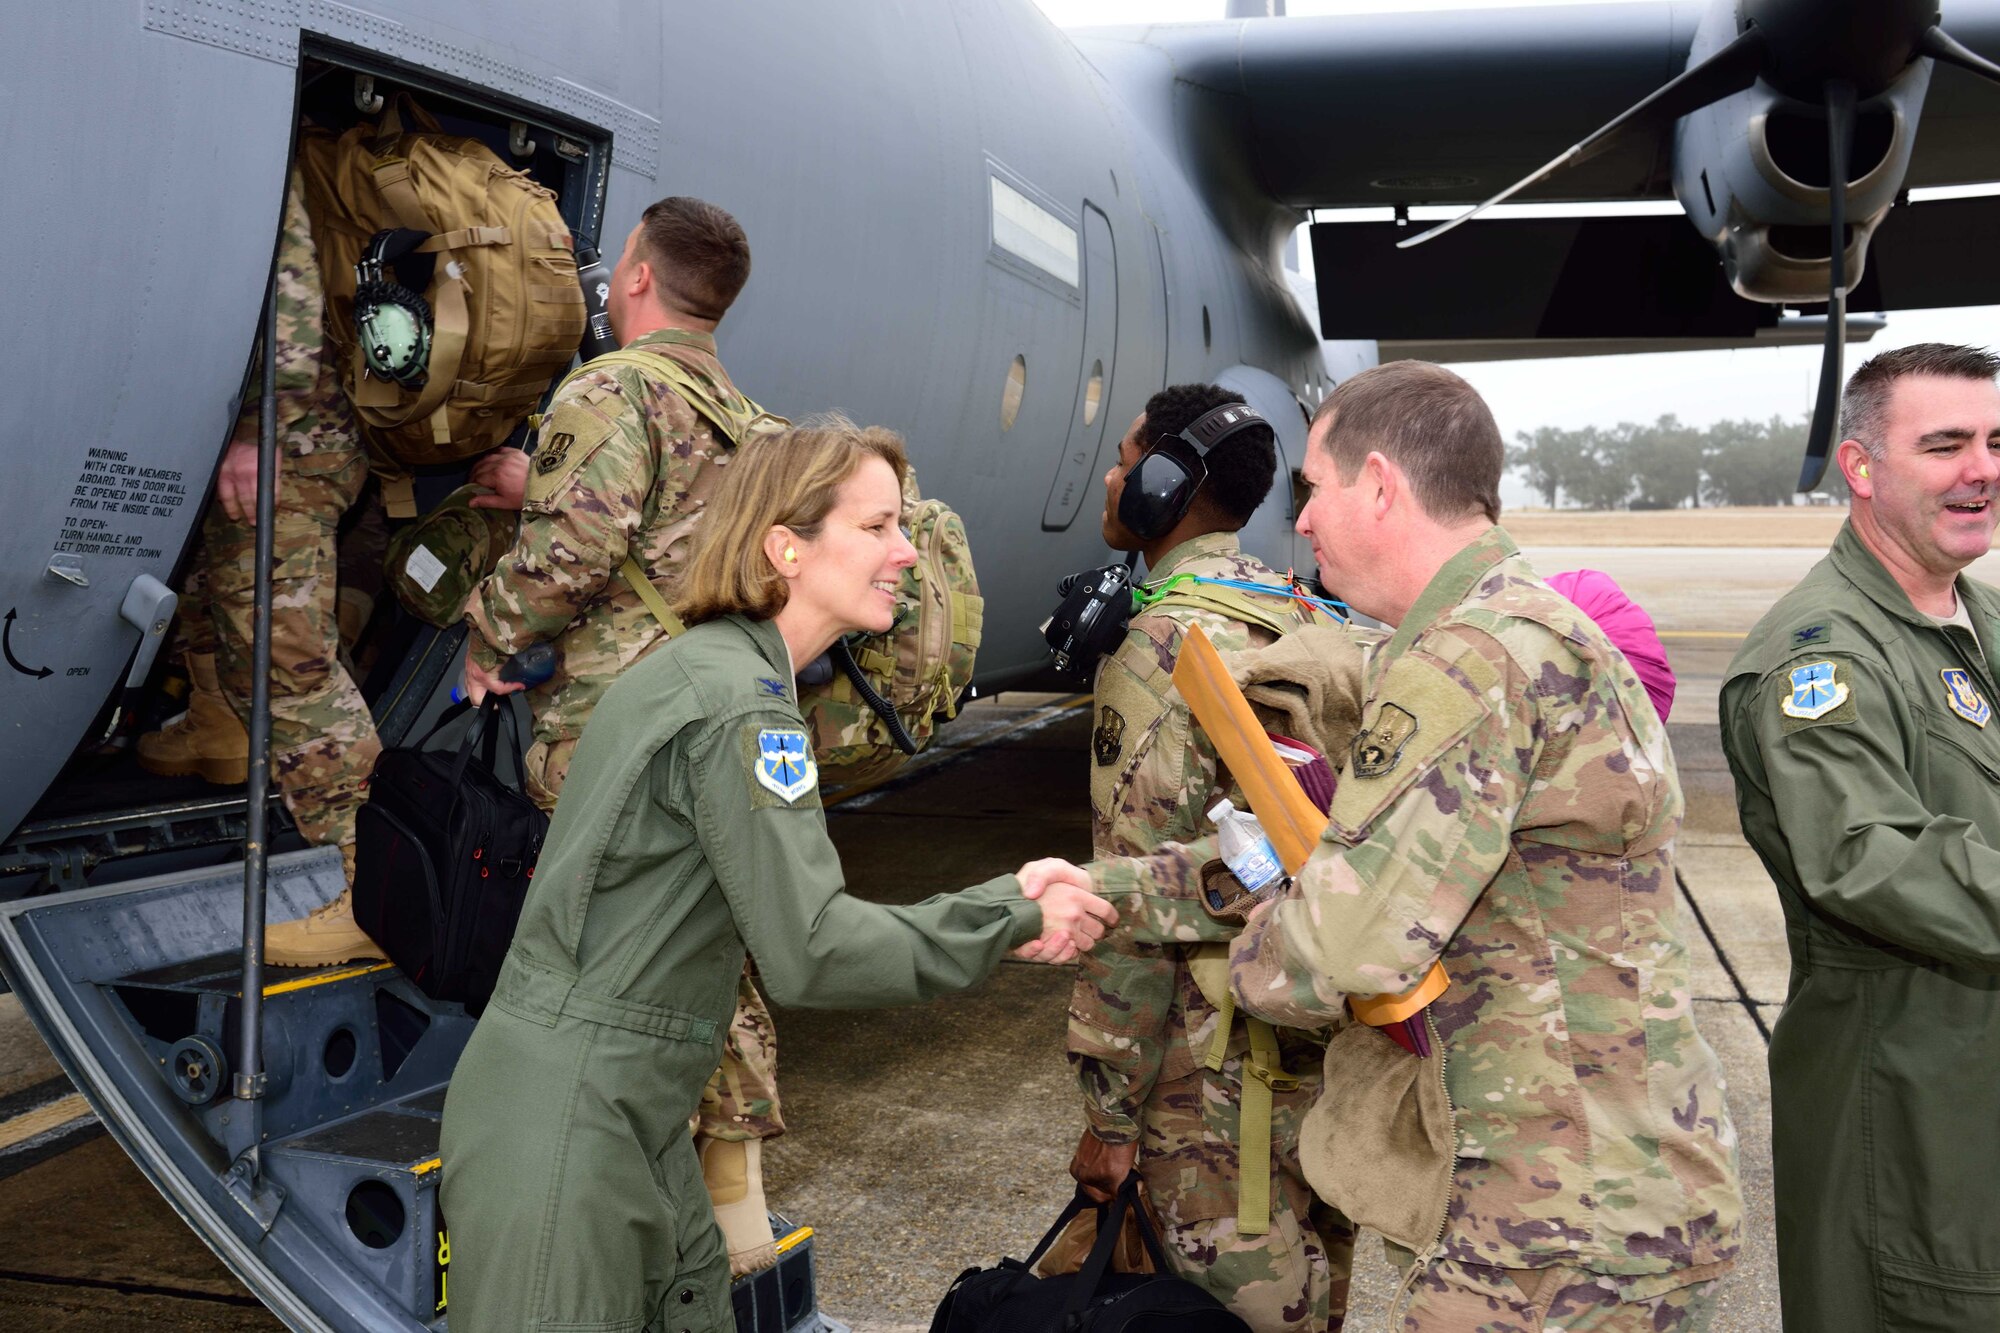 Col. Jennie R. Johnson, 403rd Wing commander, thanks members of the 815th Airlift Squadron, 803rd Aircraft Maintenance Squadron, and support personnel for their service as they board a C-130J Super Hercules aircraft deploying to Southwest Asia Jan. 8, 2018. The mission of the 815th AS, a tactical airlift squadron assigned to the 403rd Wing at Keesler Air Force Base, Mississippi, is to recruit, organize and train to deploy, redeploy and employ air and ground forces to any area of the world and provide them with logistical support. (U.S. Air Force photo by Tech. Sgt. Ryan Labadens)